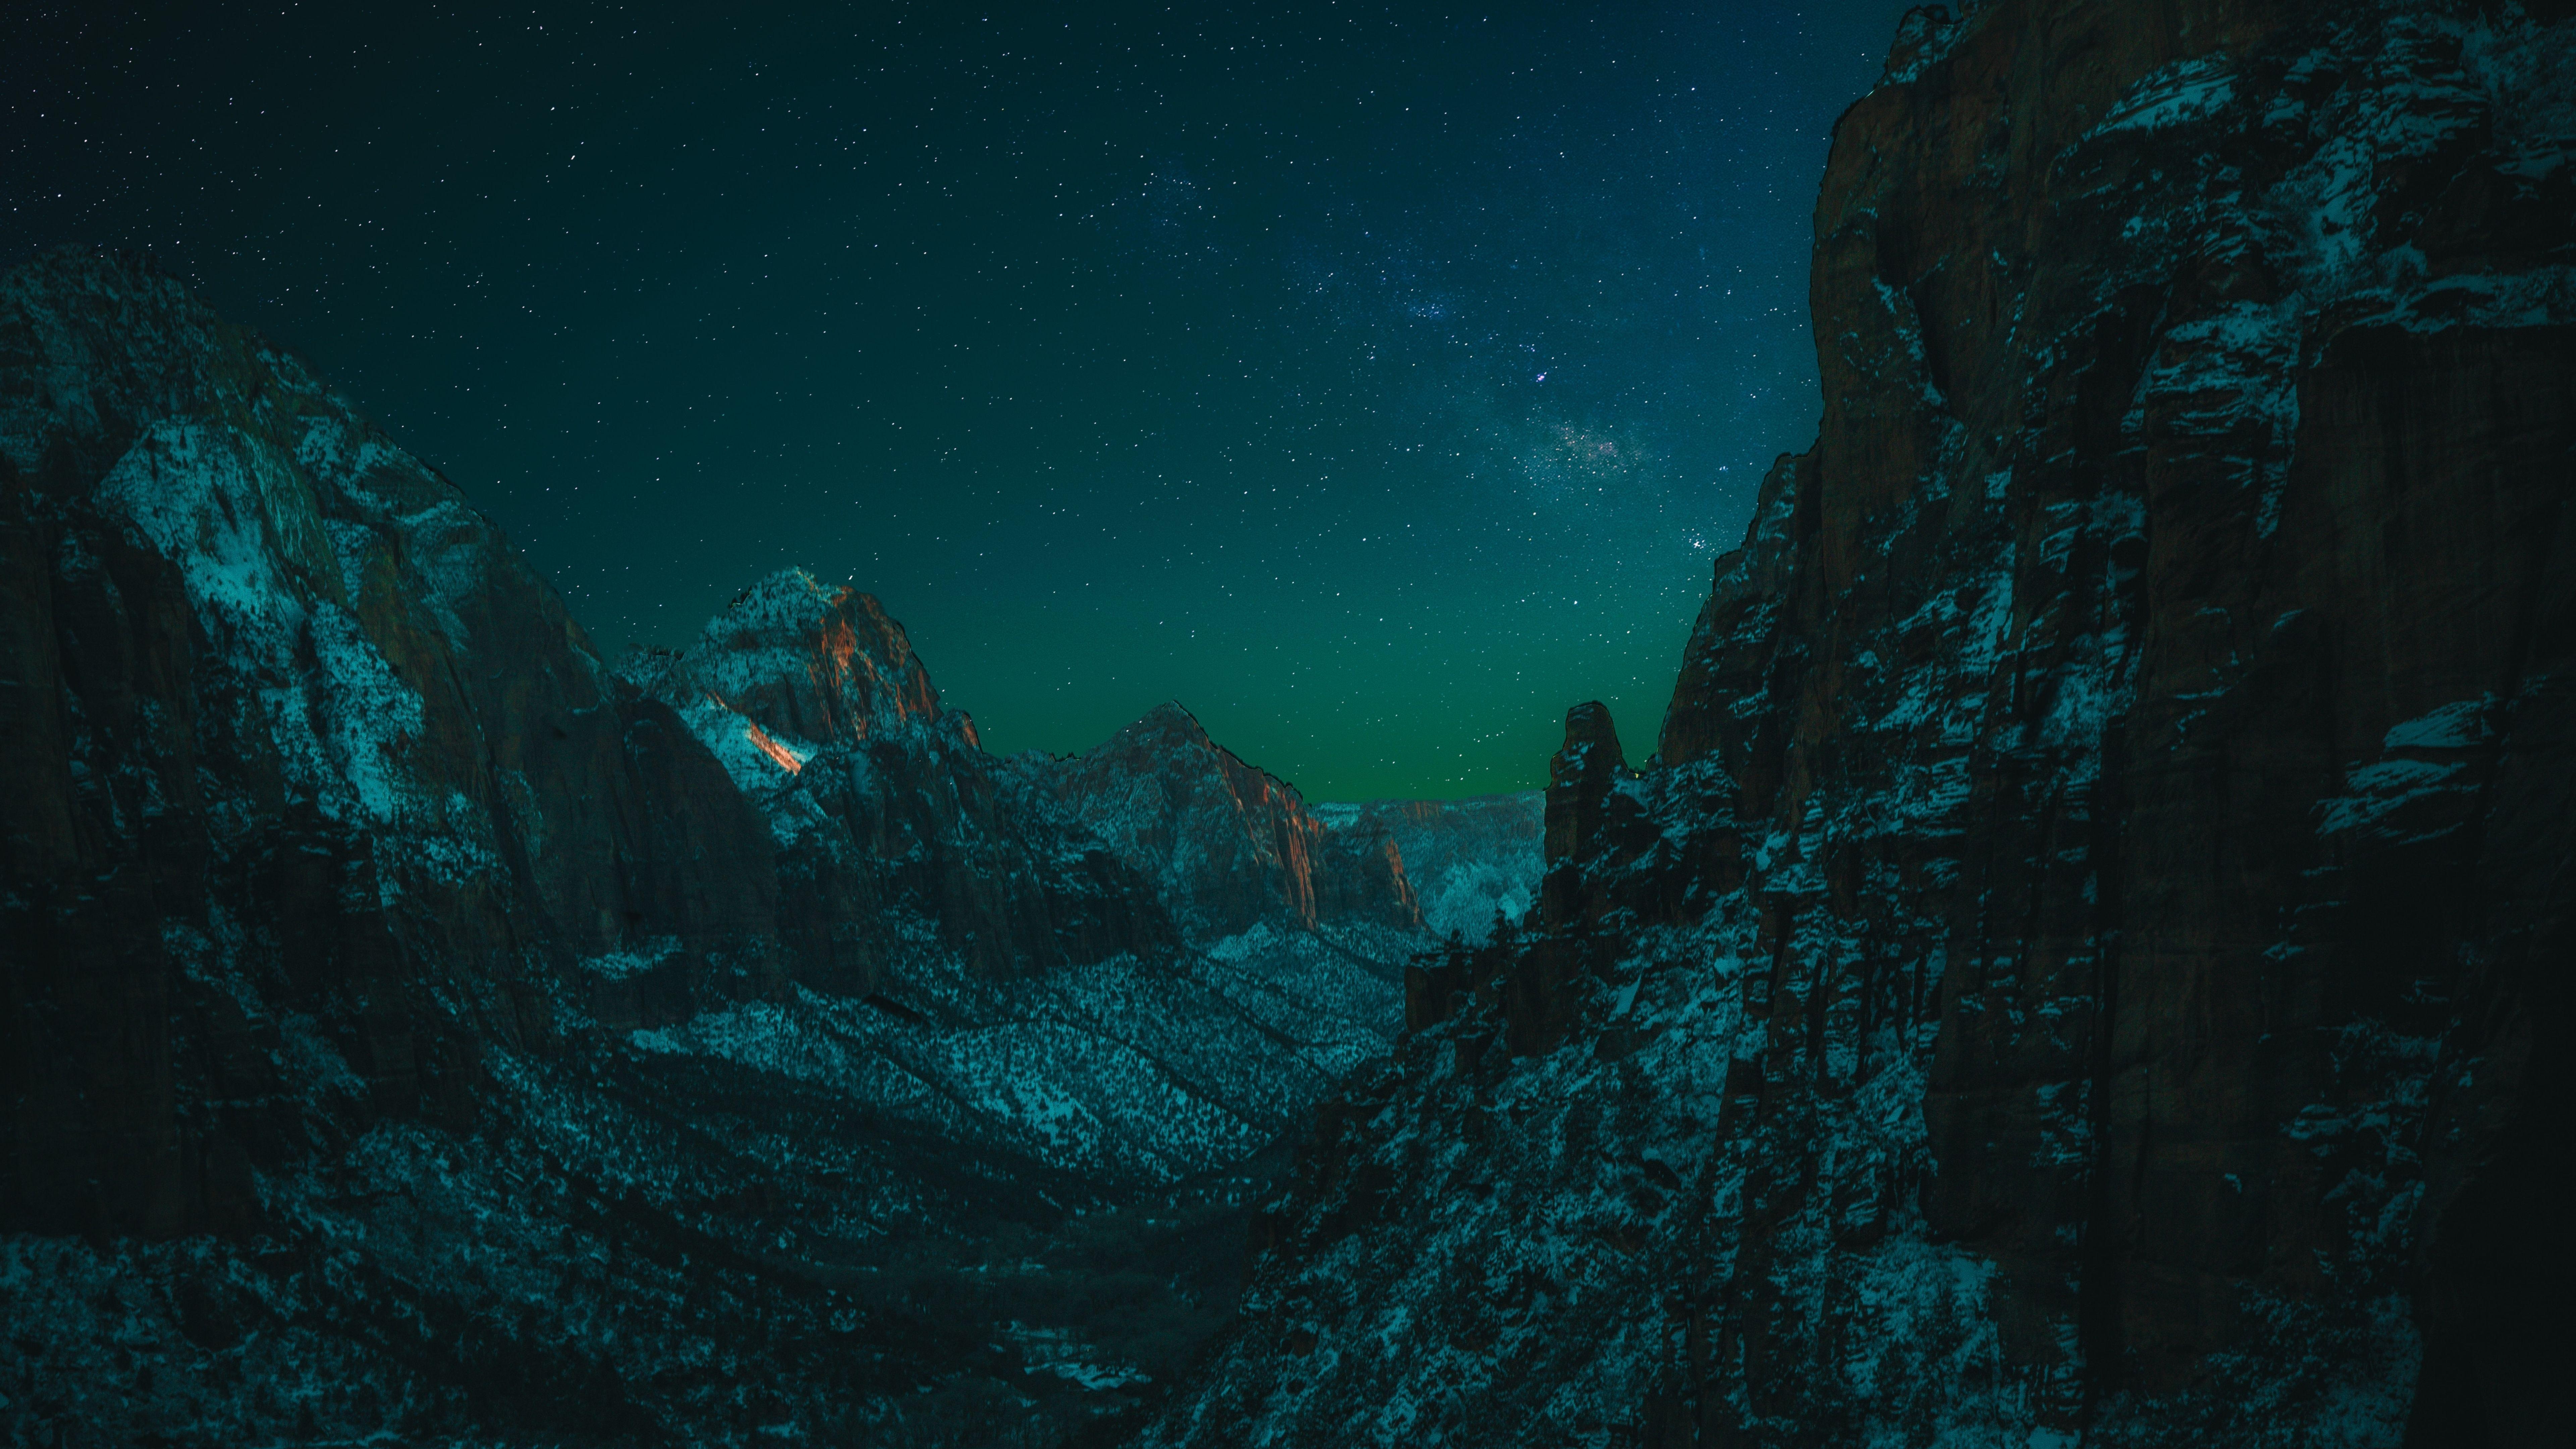 8k Night Wallpapers Top Free 8k Night Backgrounds Wal - vrogue.co